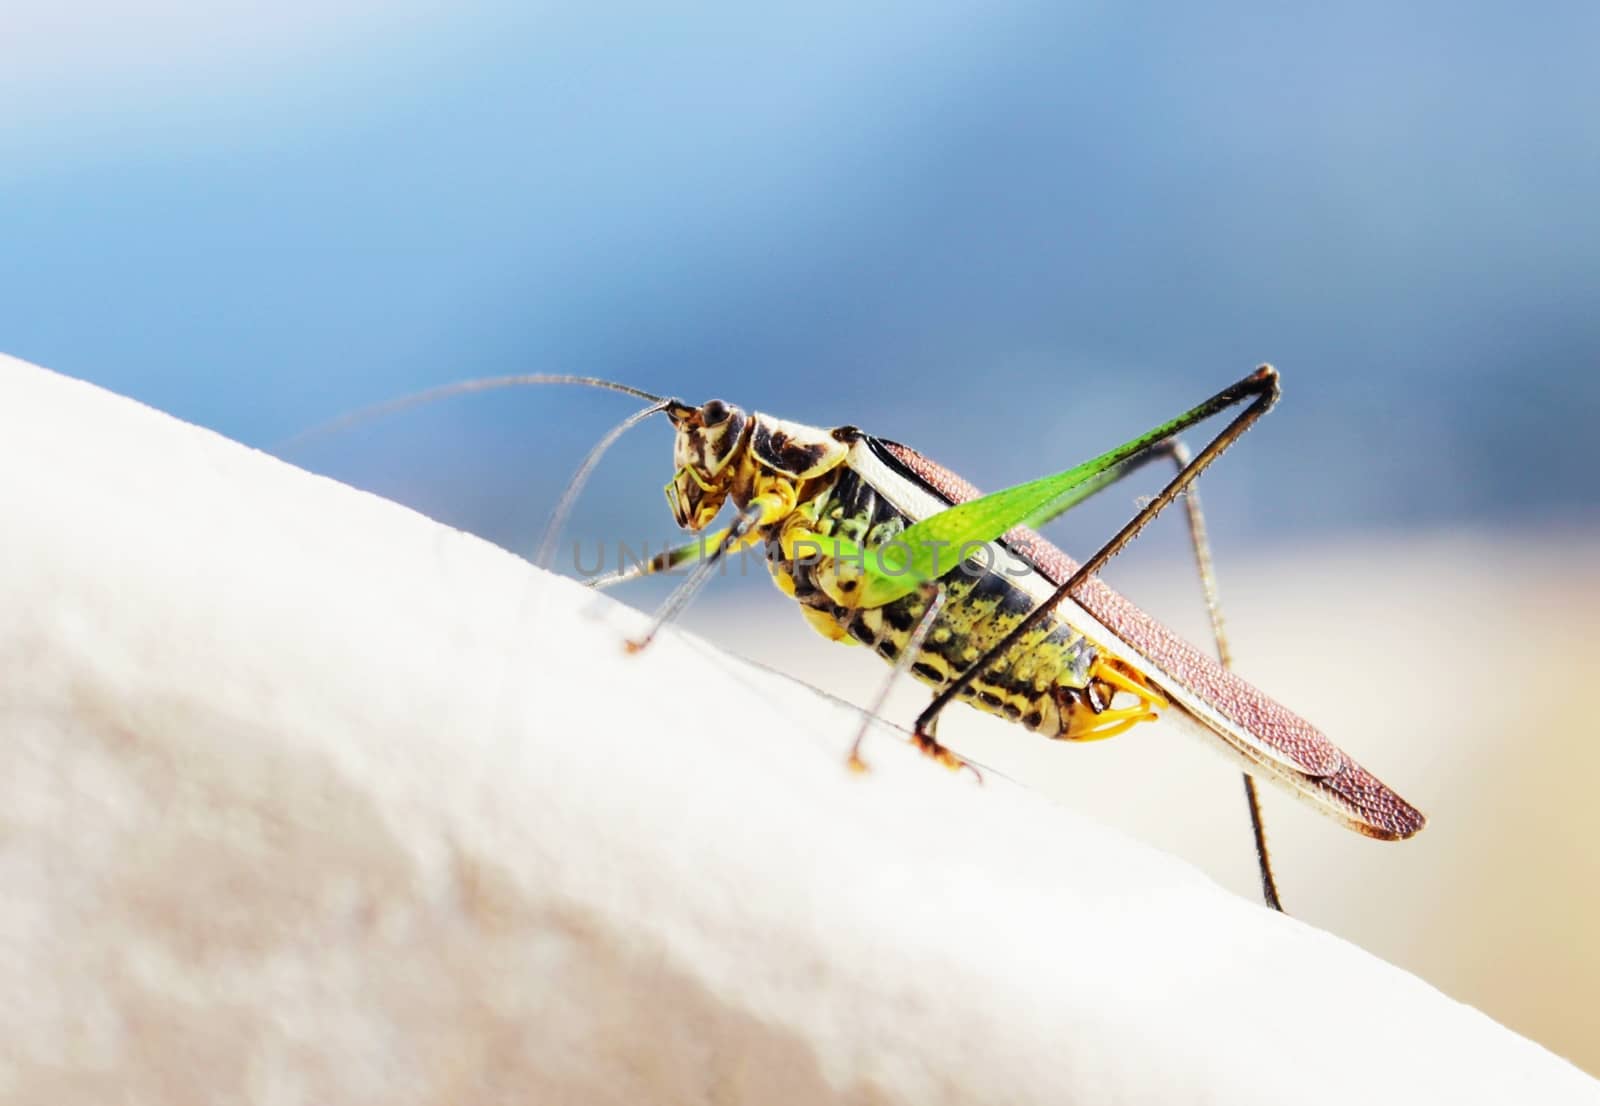 Side view portrait of a grasshopper sitting on concrete, with sky in the backdrop
